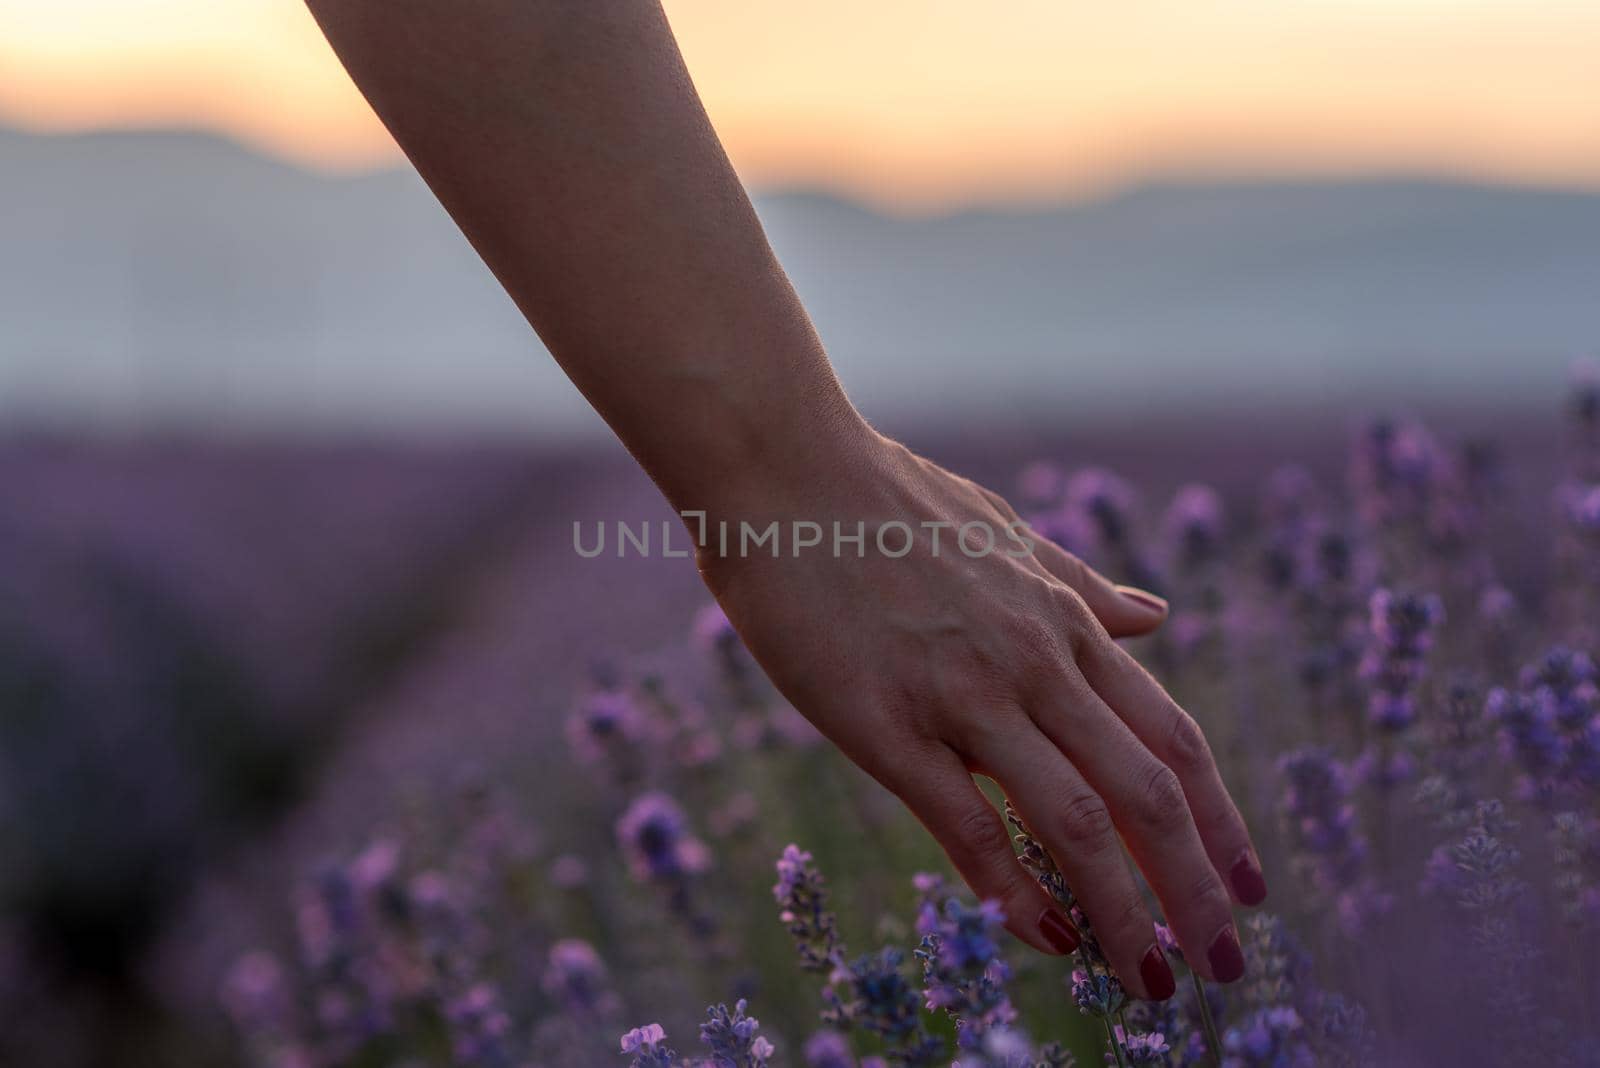 Touching the lavender at beautiful sunset 